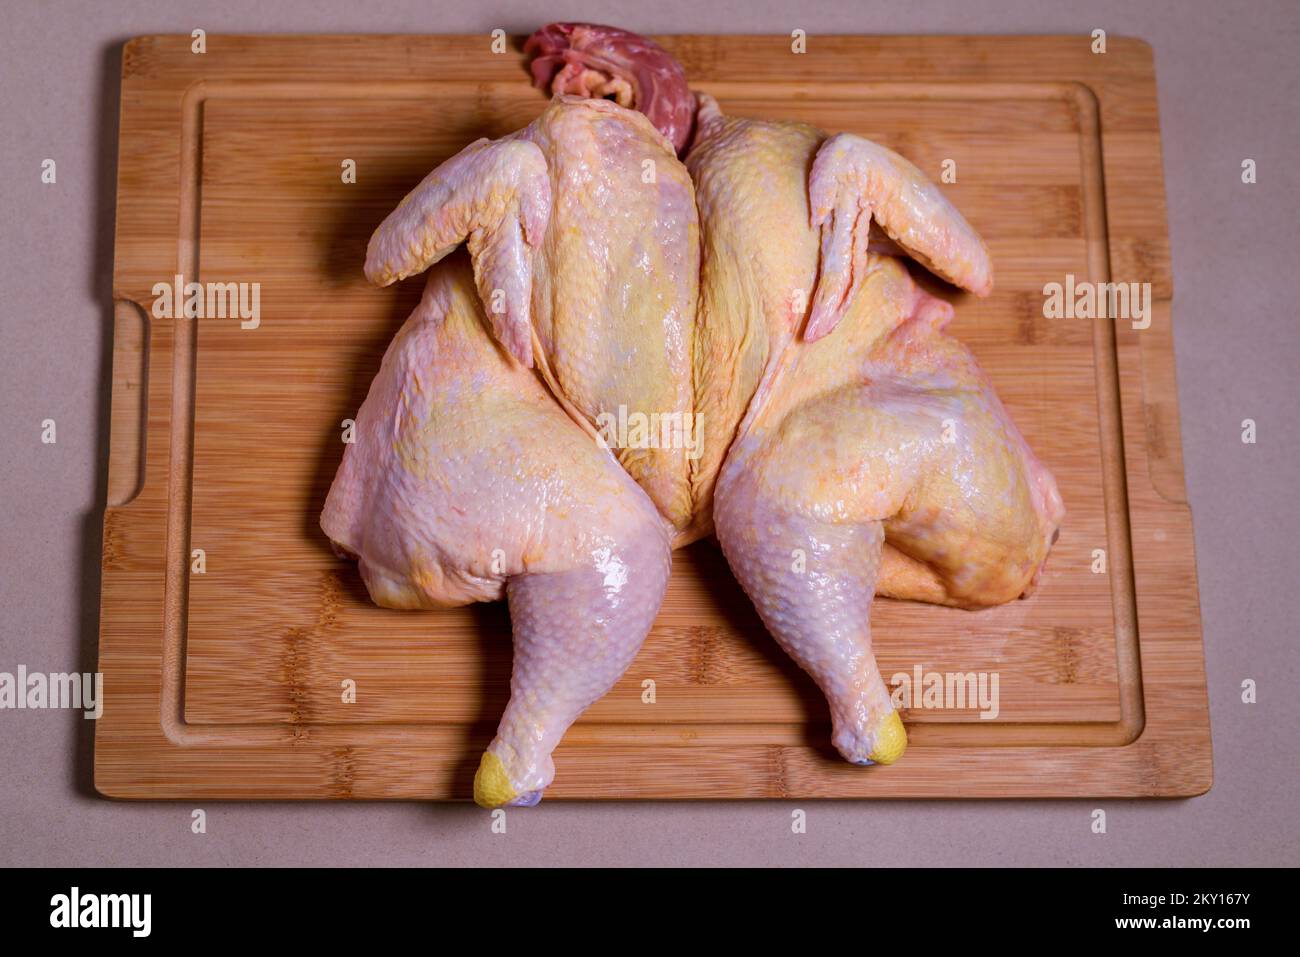 Raw whole chicken on wooden board. chicken tobacco. Close-up. Stock Photo